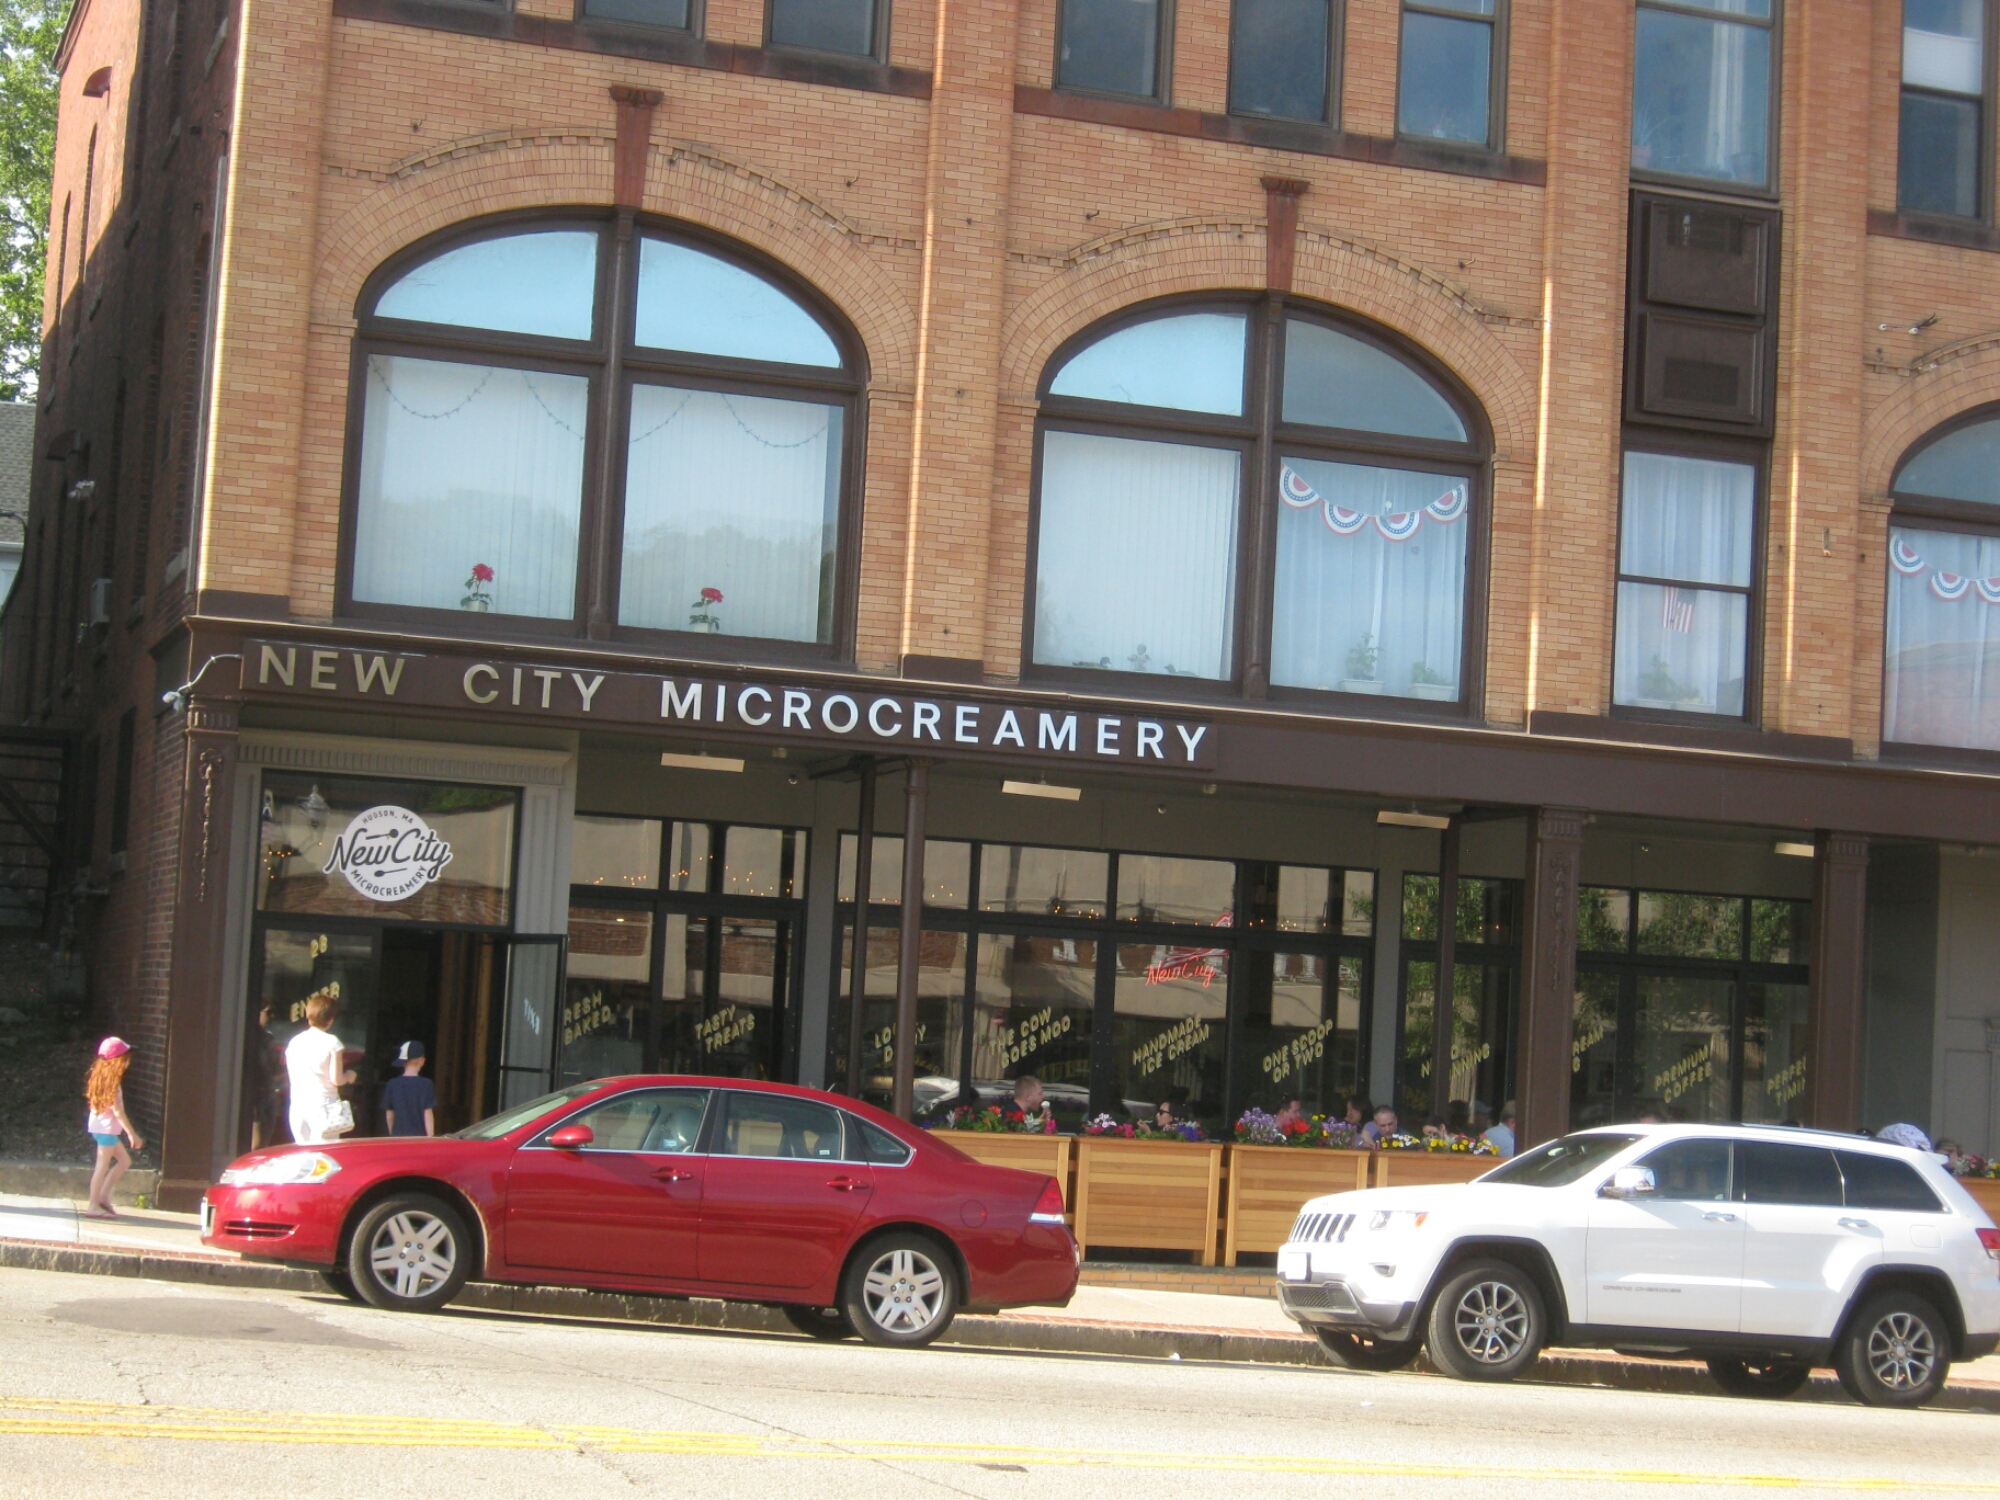 New City Microcreamery in Hudson visit here with metrowest limousine